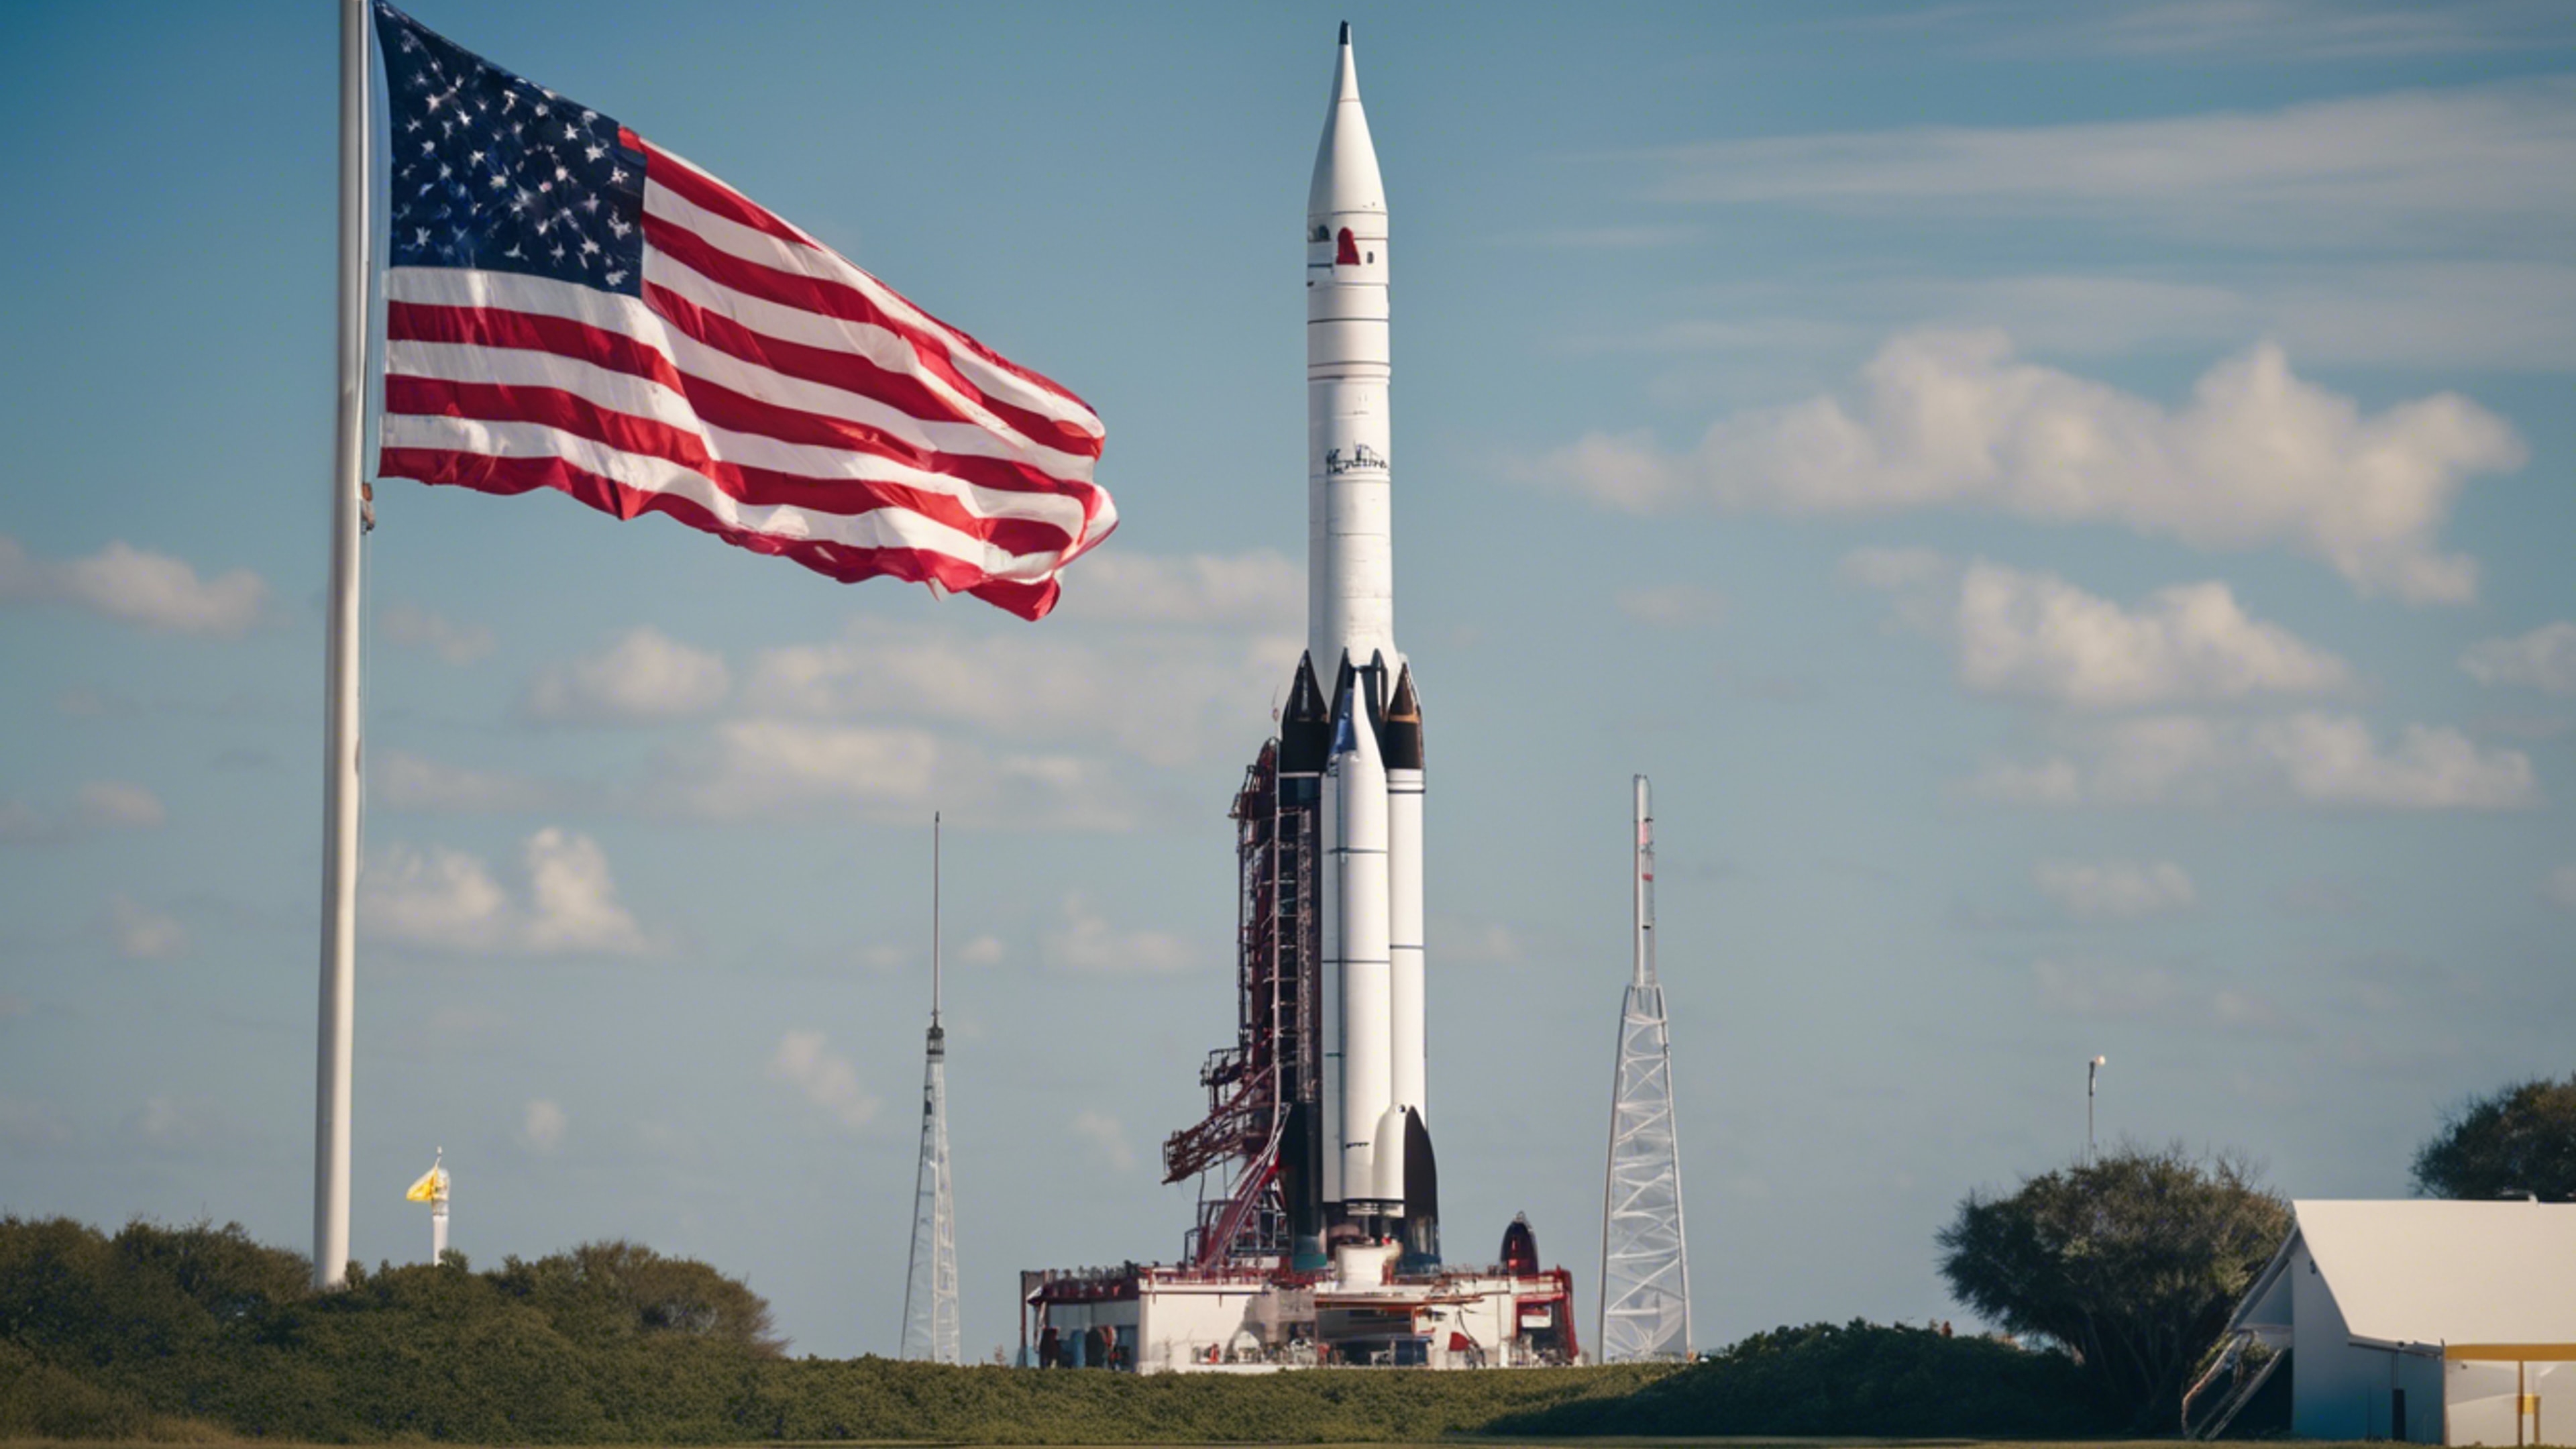 A historic rocket display at Cape Canaveral, with a clear blue sky and the American flag waving in the background. Тапет[7e3199d5ab33424fb953]